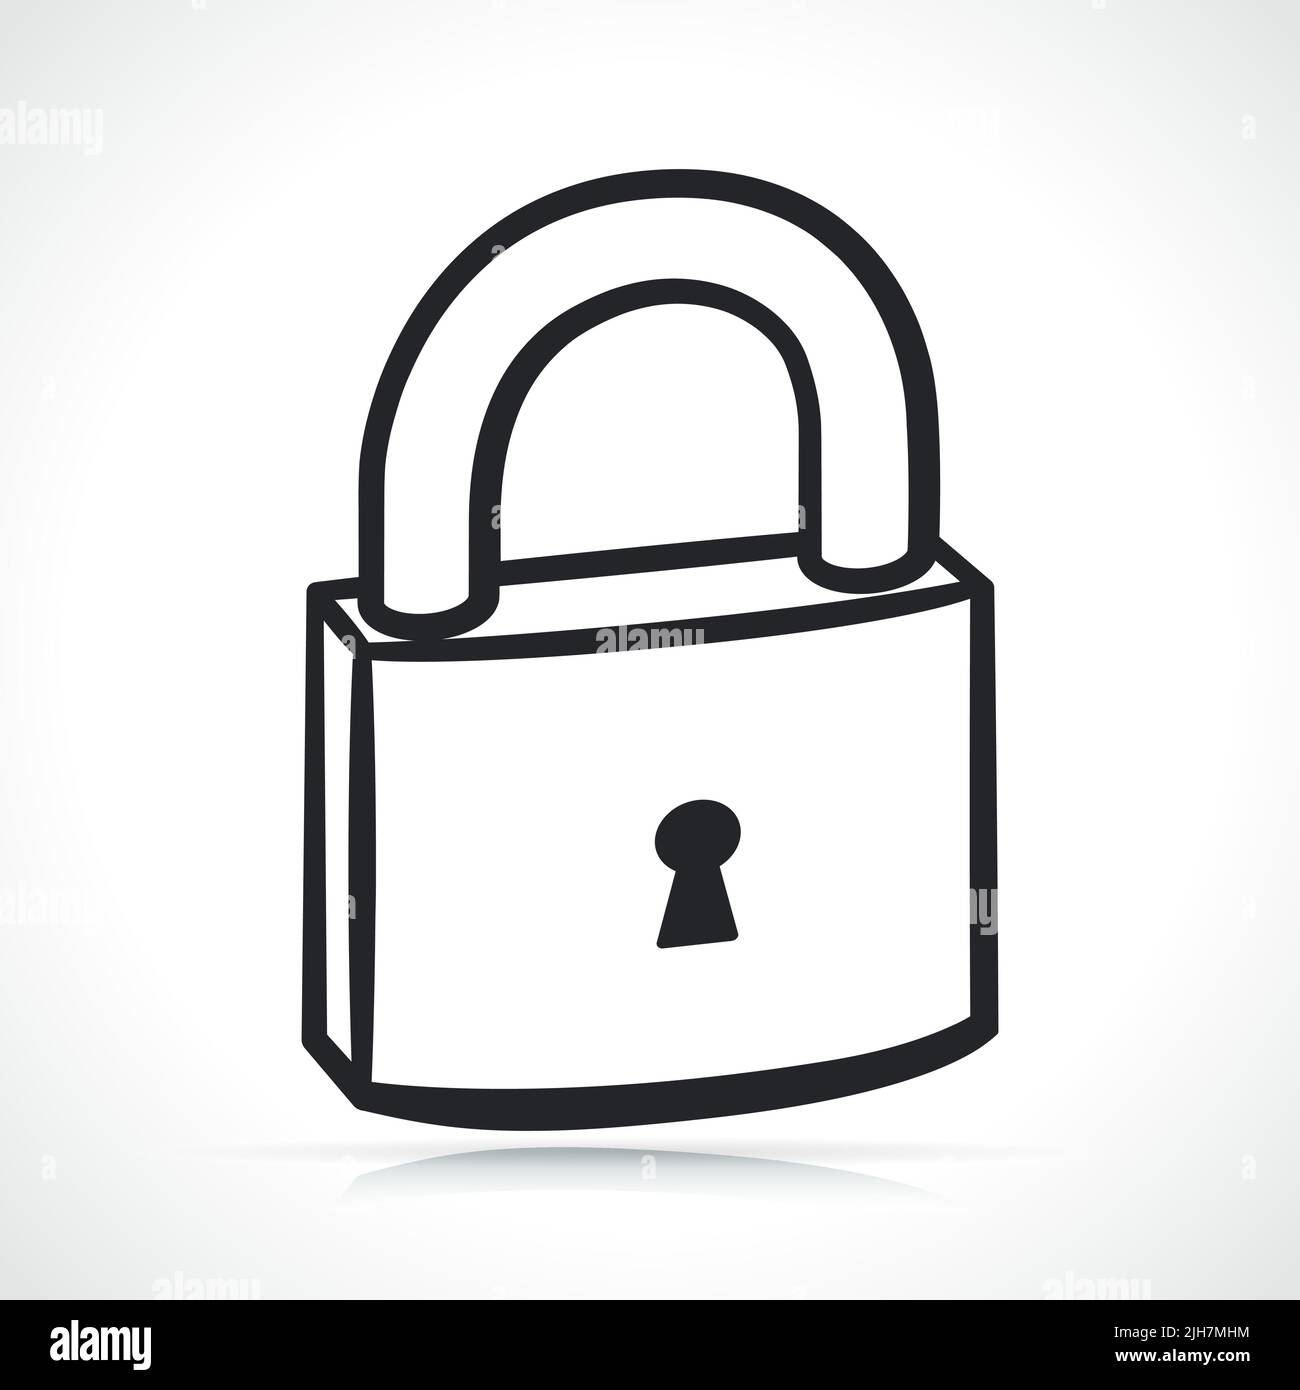 padlock black and white illustration isolated drawing Stock Vector